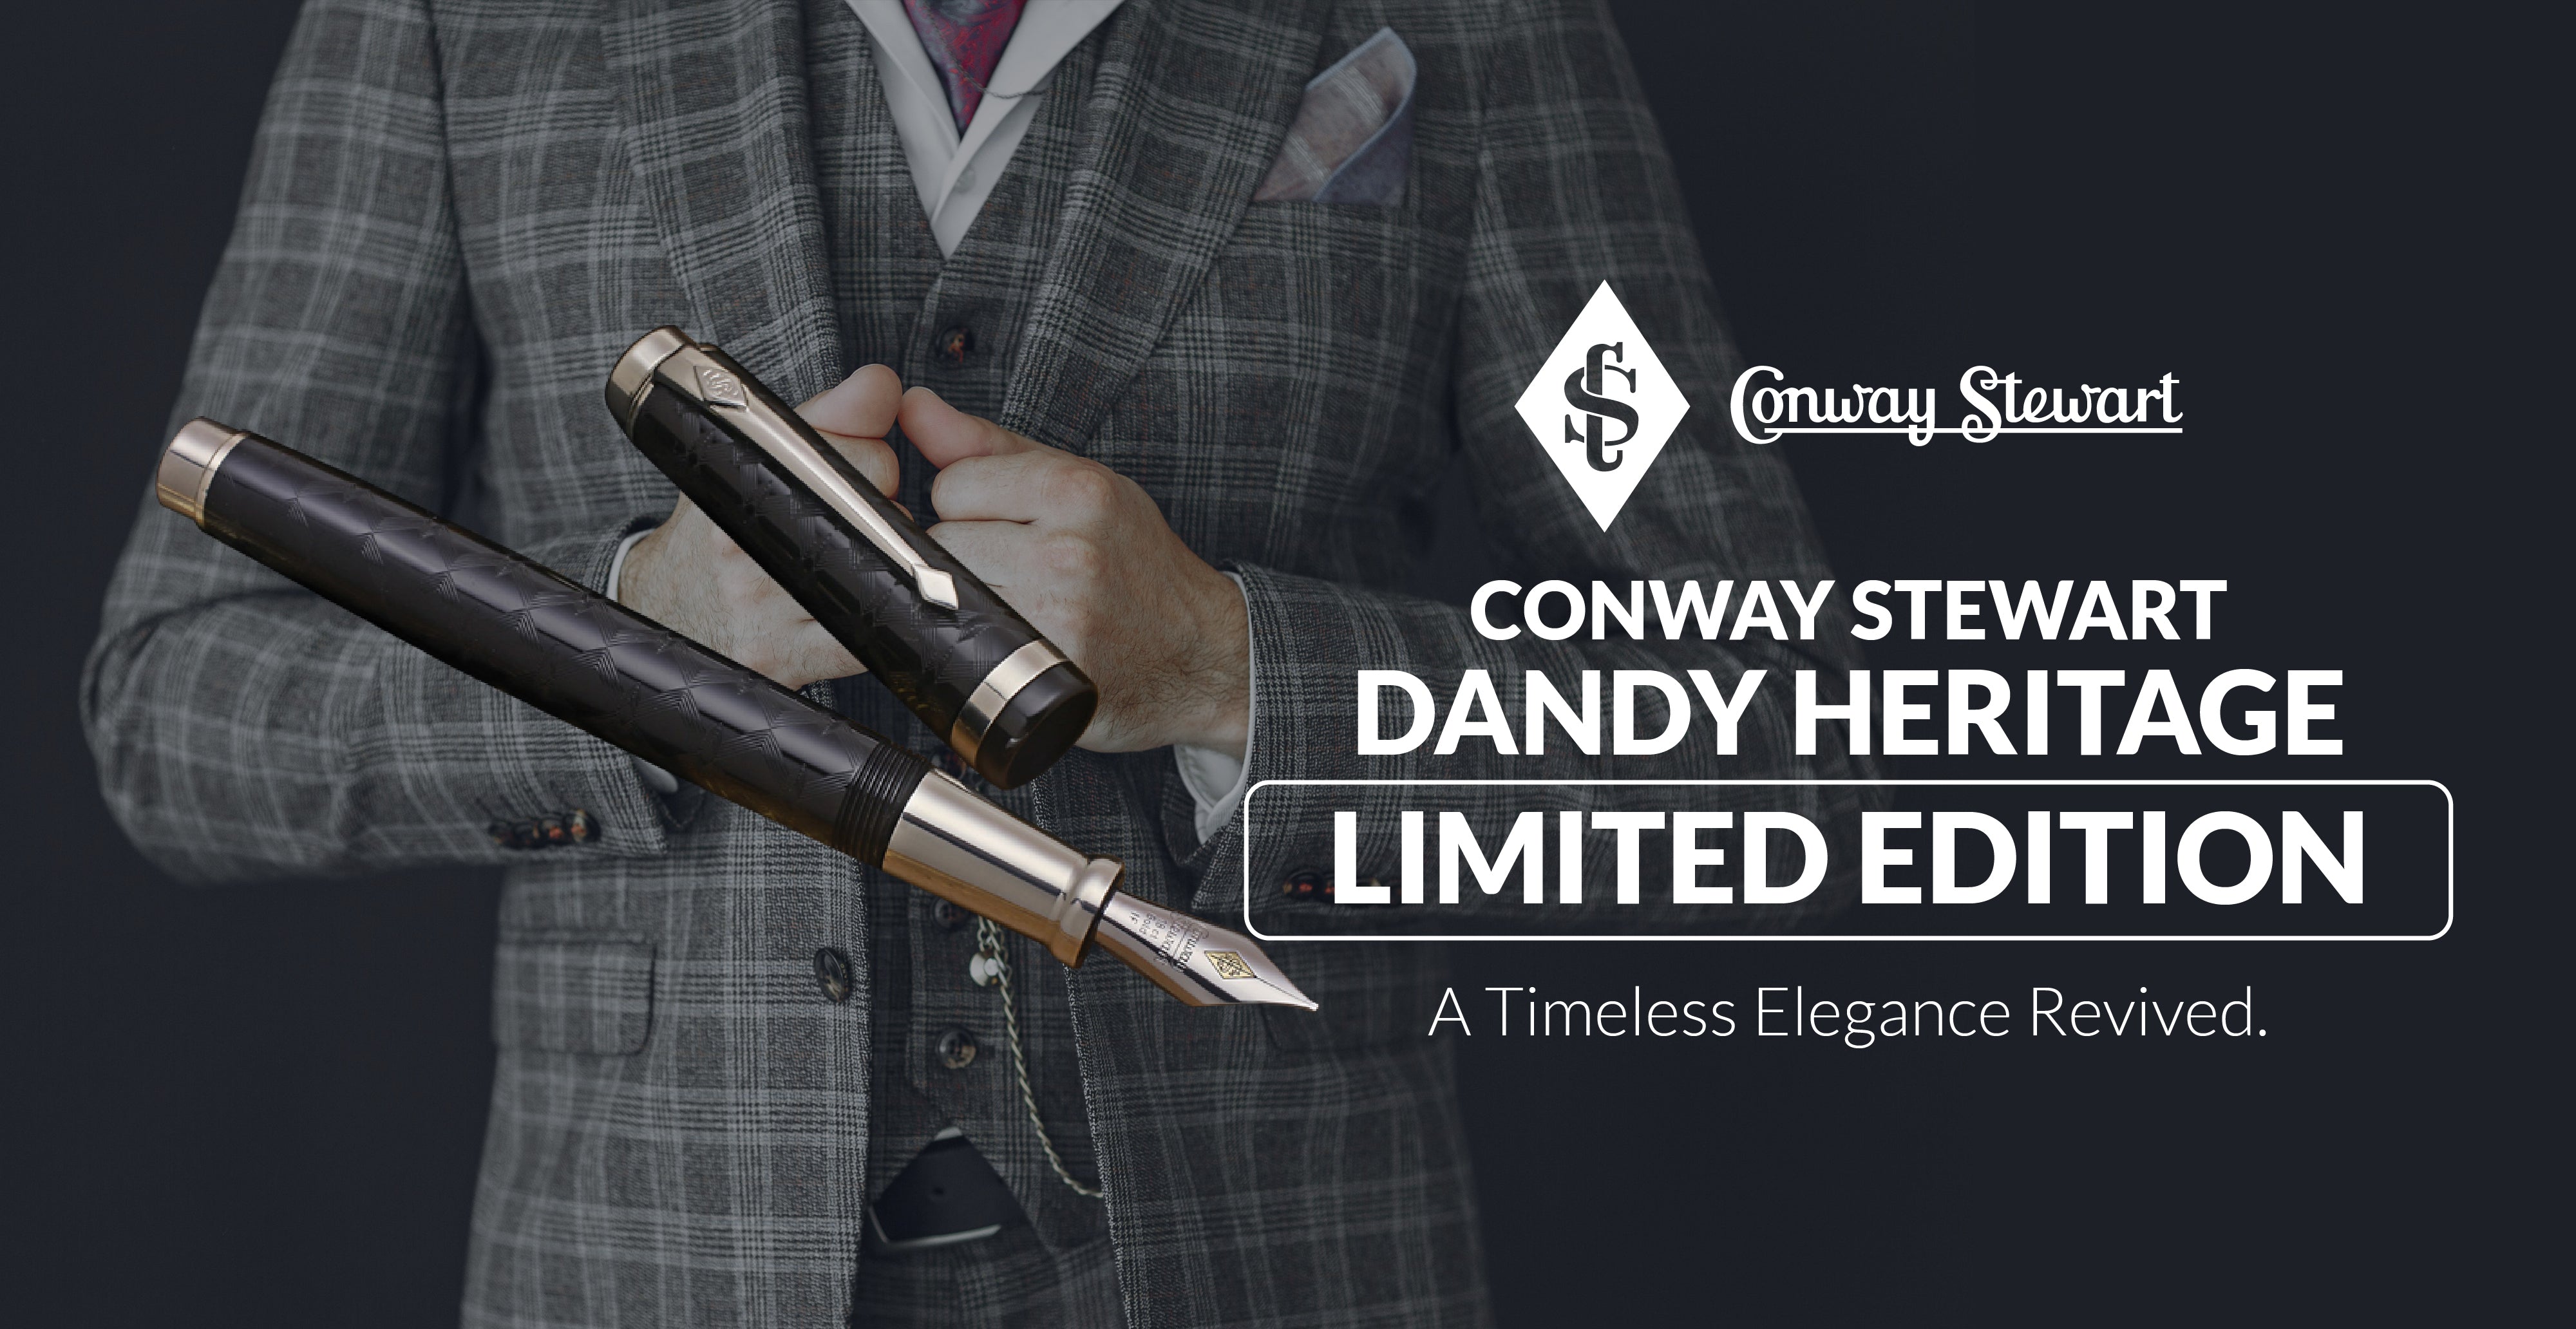 Dandy Heritage Limited Edition